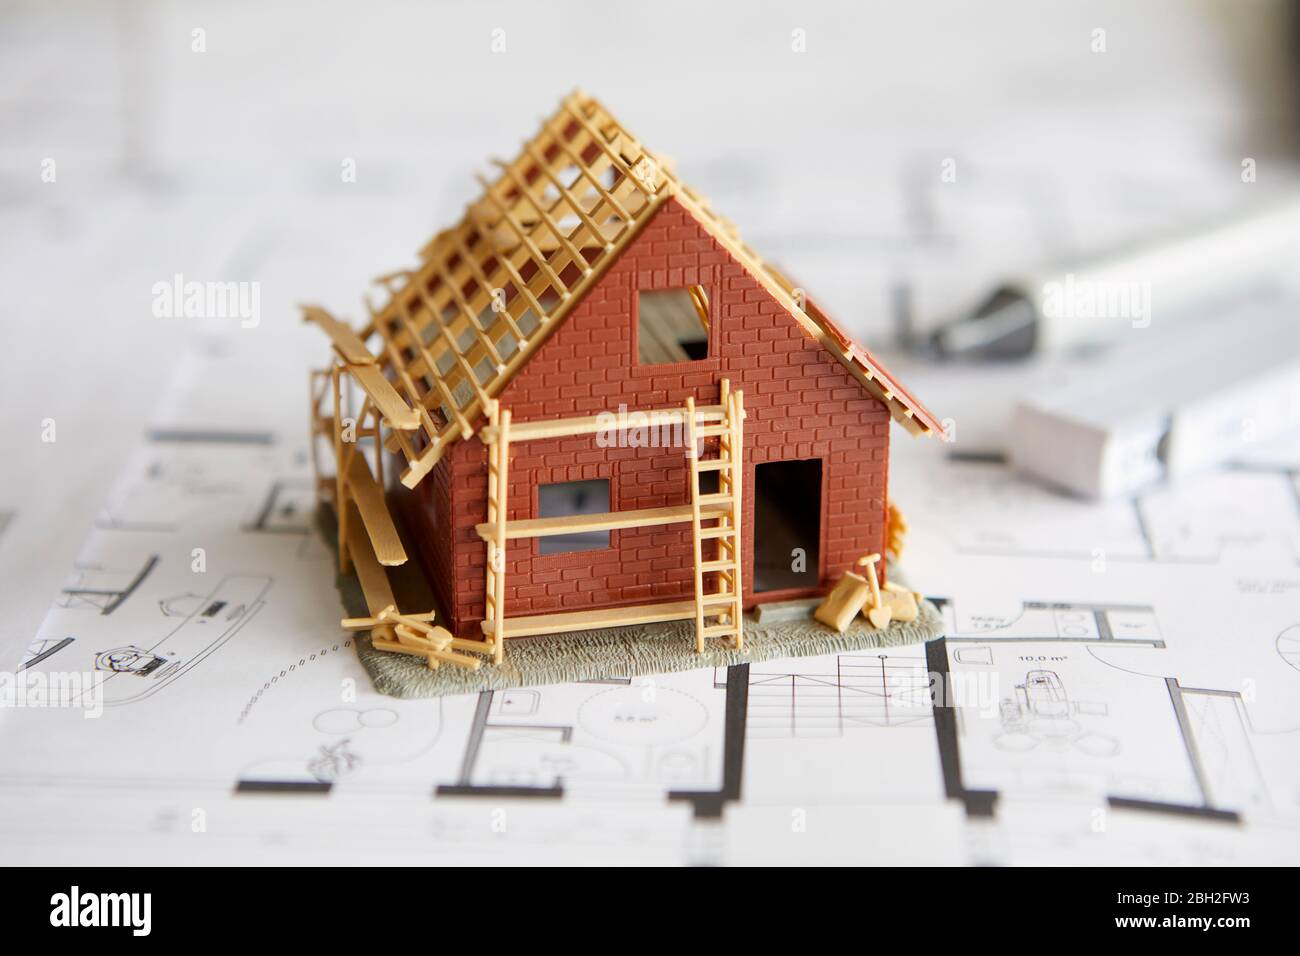 Architecture, model of home ownership on construction plan Stock Photo